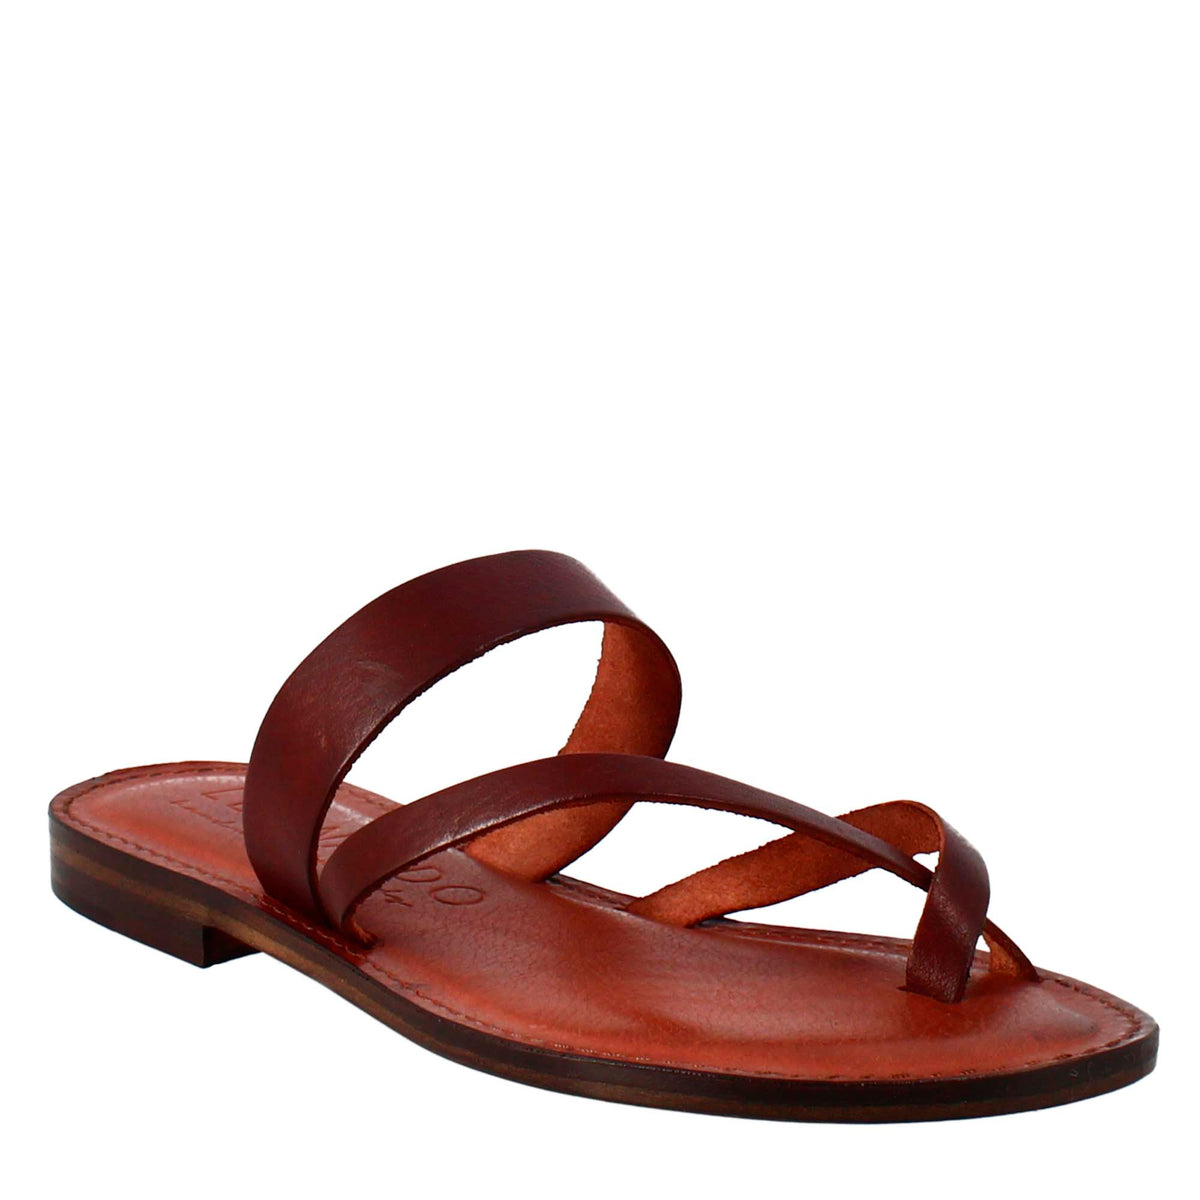 Ancient Roman style Nebula women's sandals in brown leather